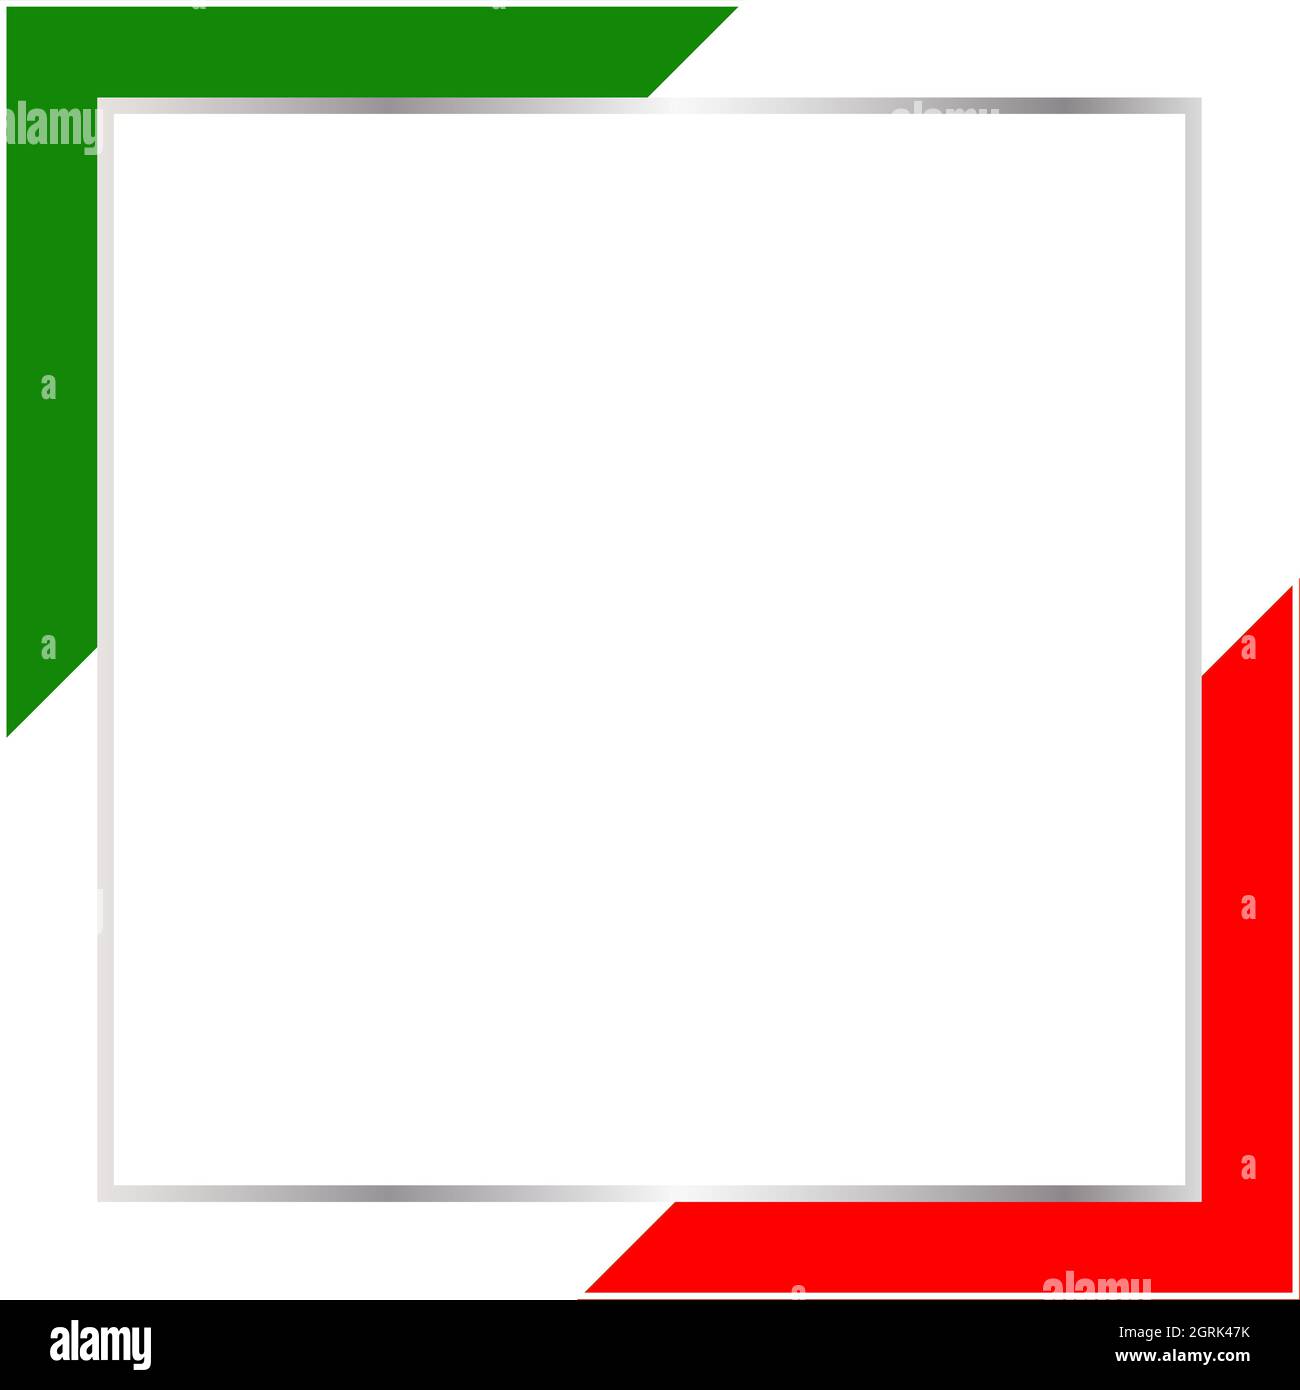 Italian green white red flag border frame with empty space for your text. Stock Vector